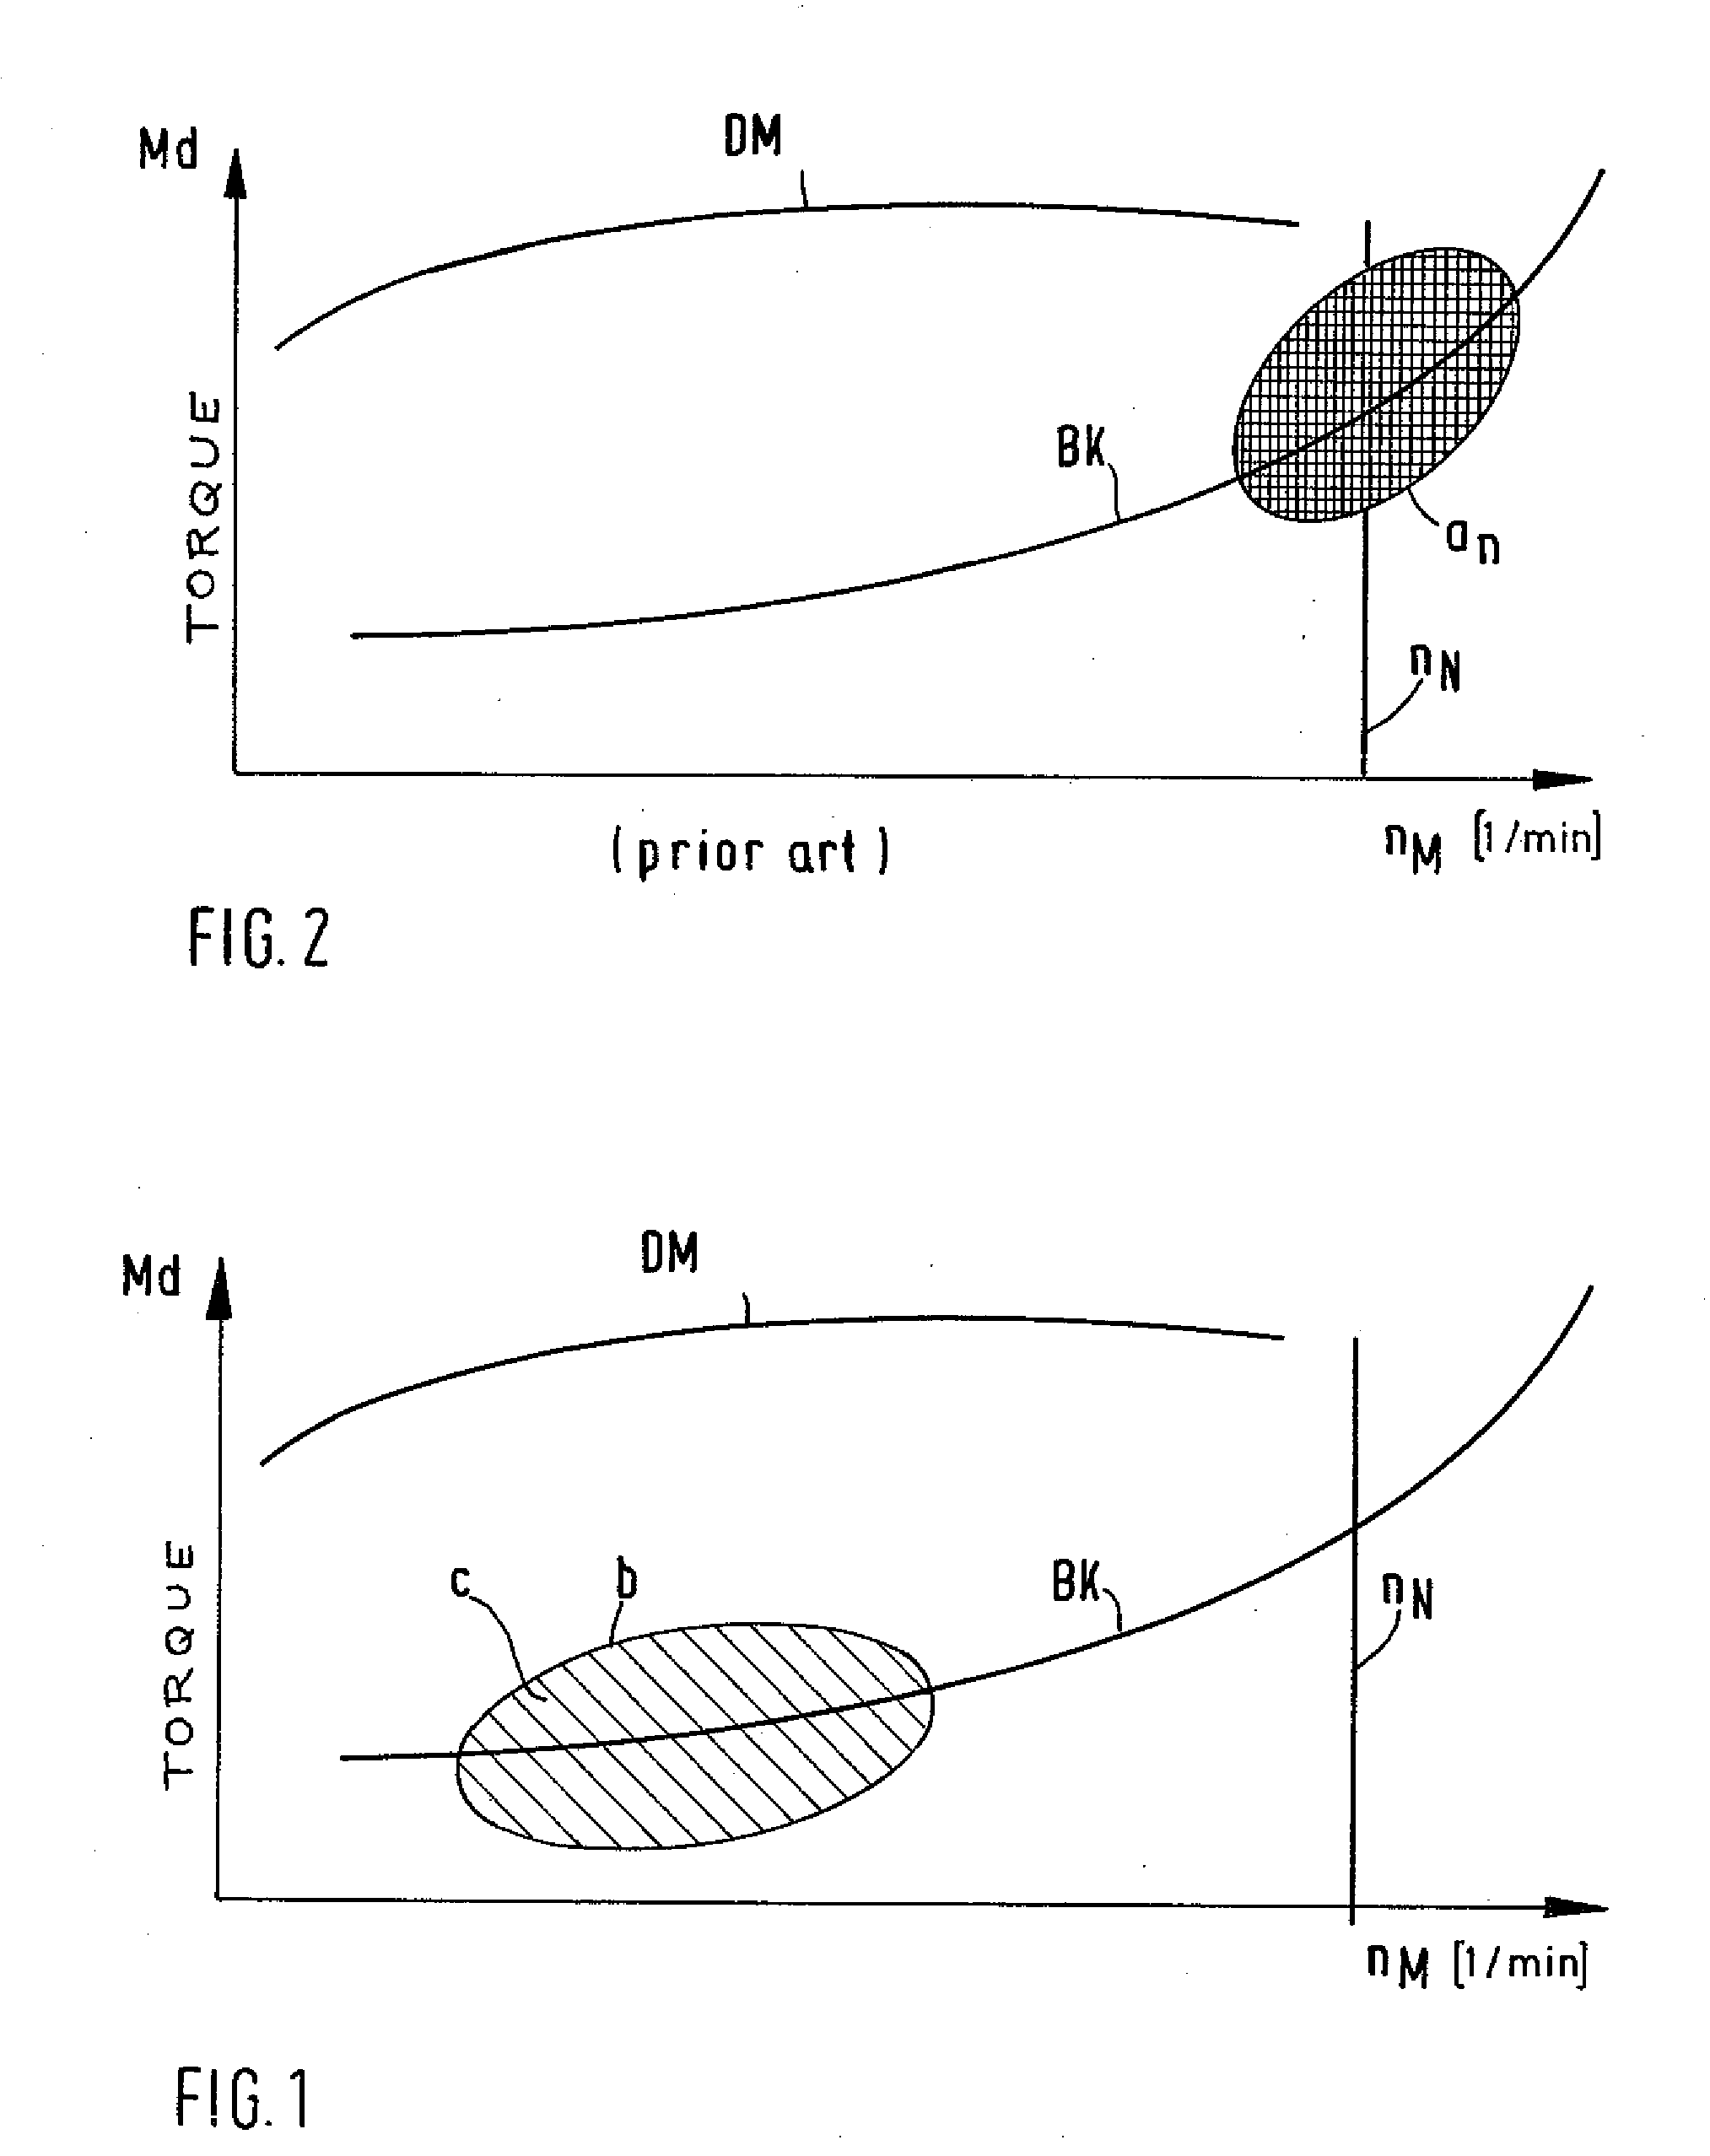 Method For The Regeneration Of A Particle Filter Installed In The Exhaust Gas Train Of A Vehicular Diesel Engine